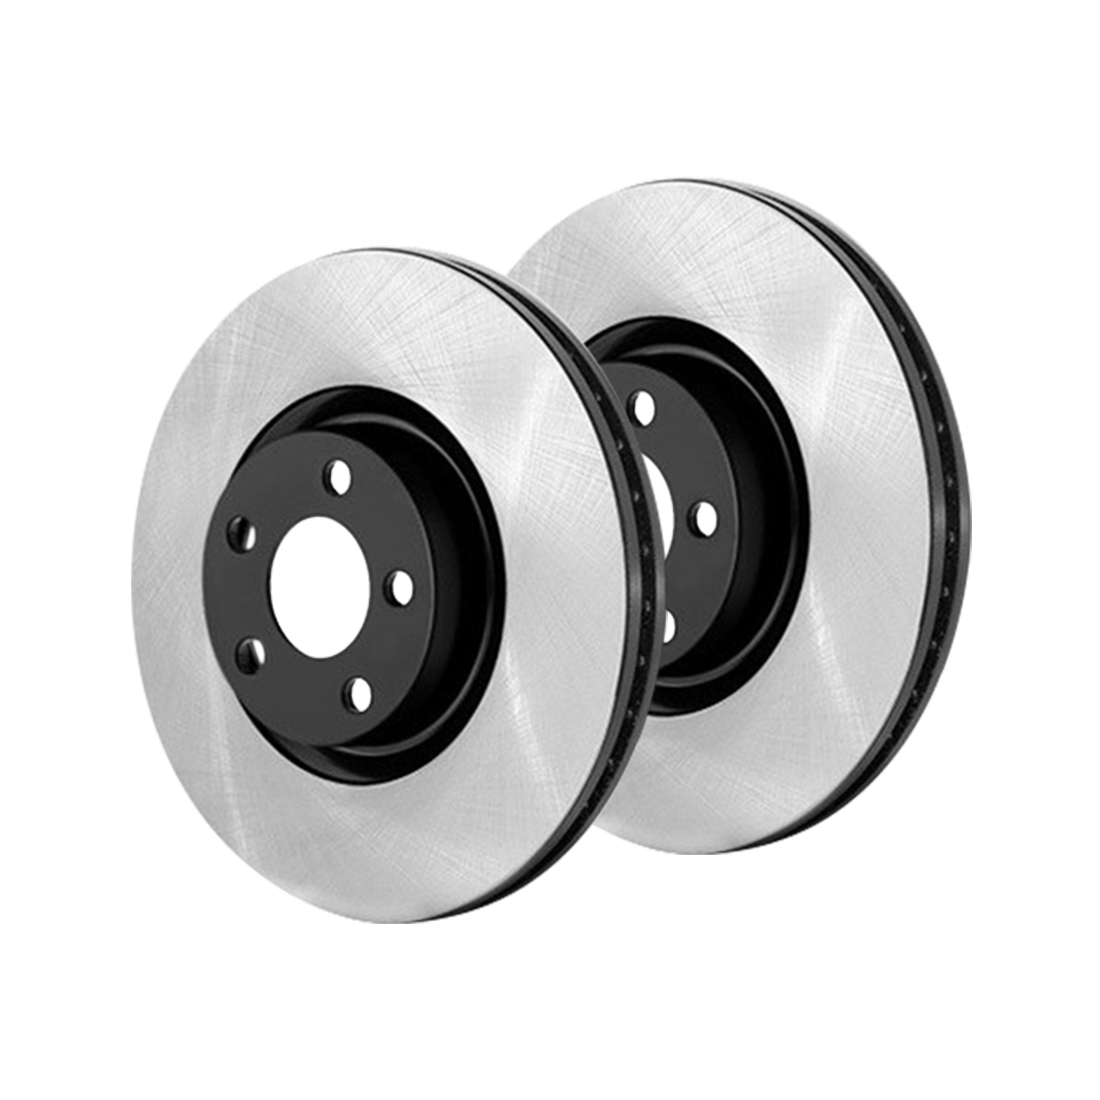 Centric Parts Centric Front High Carbon Brake Rotors 2PCS For 2012 Chrysler 300 V6, AWD